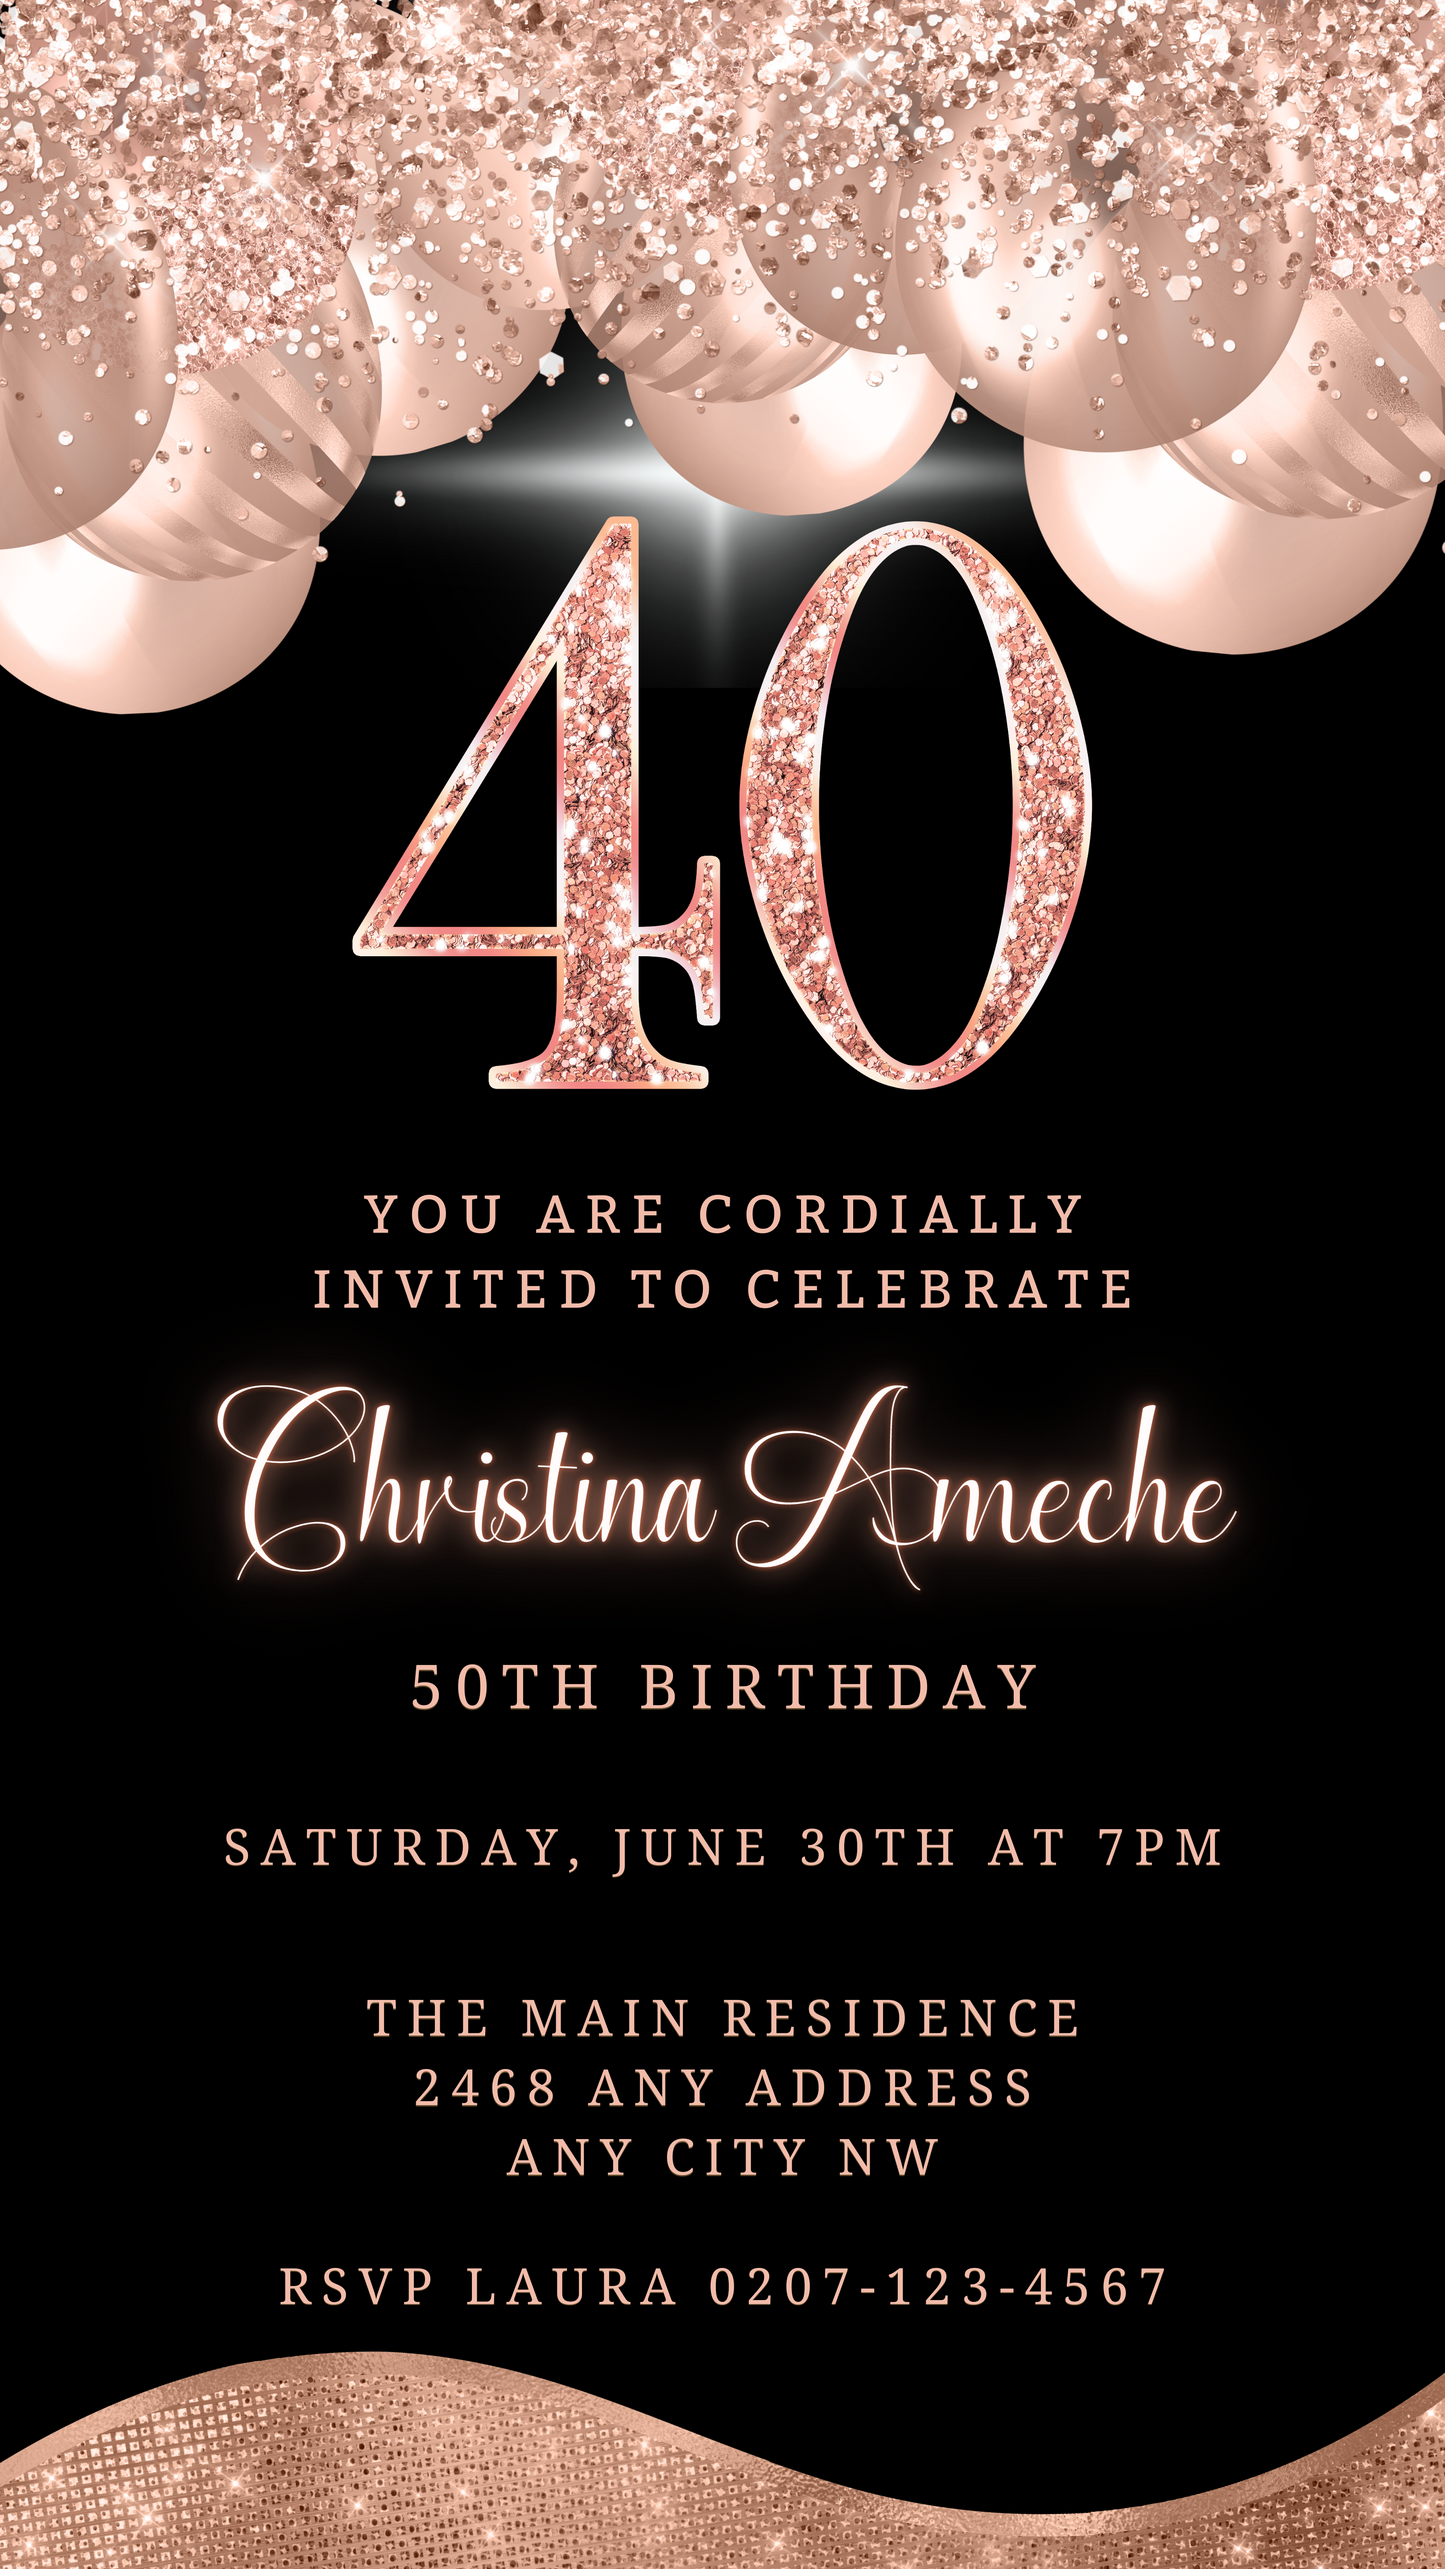 Rose Gold Balloons Glitter 40th Birthday Evite, featuring customizable black and gold design with pink glitter accents, ideal for digital invitations via Canva.